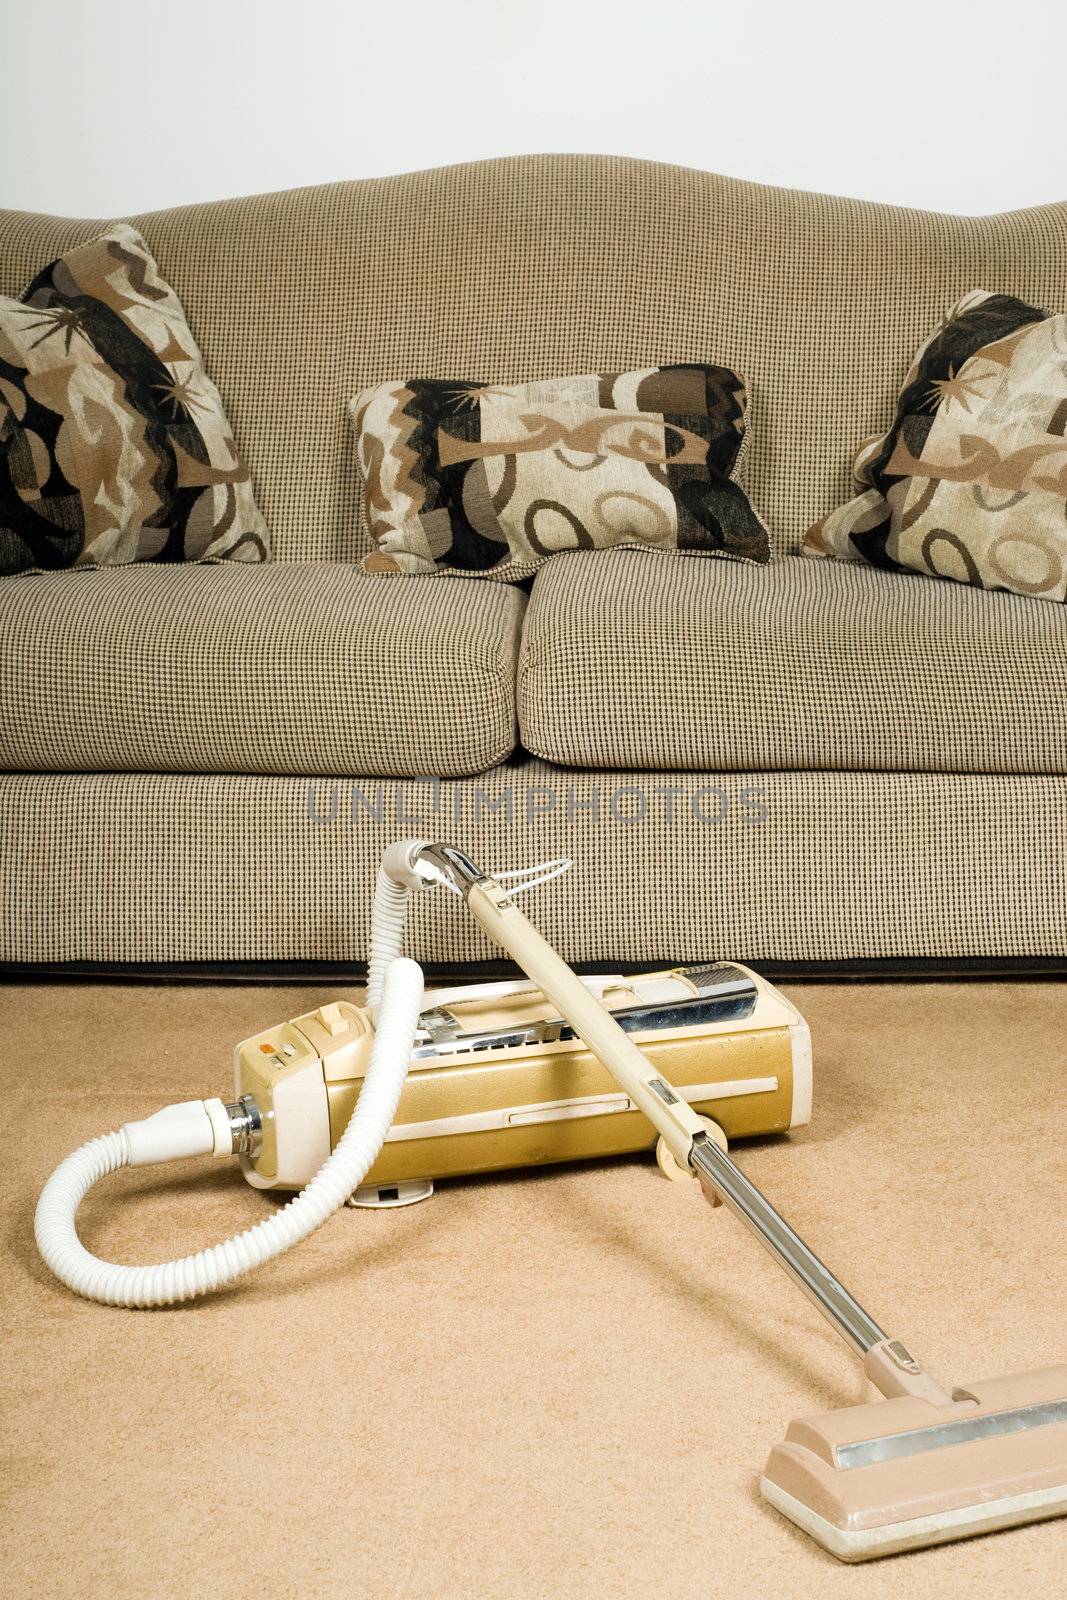 Cleaning house concept with an old canister vacuum and a plush sofa